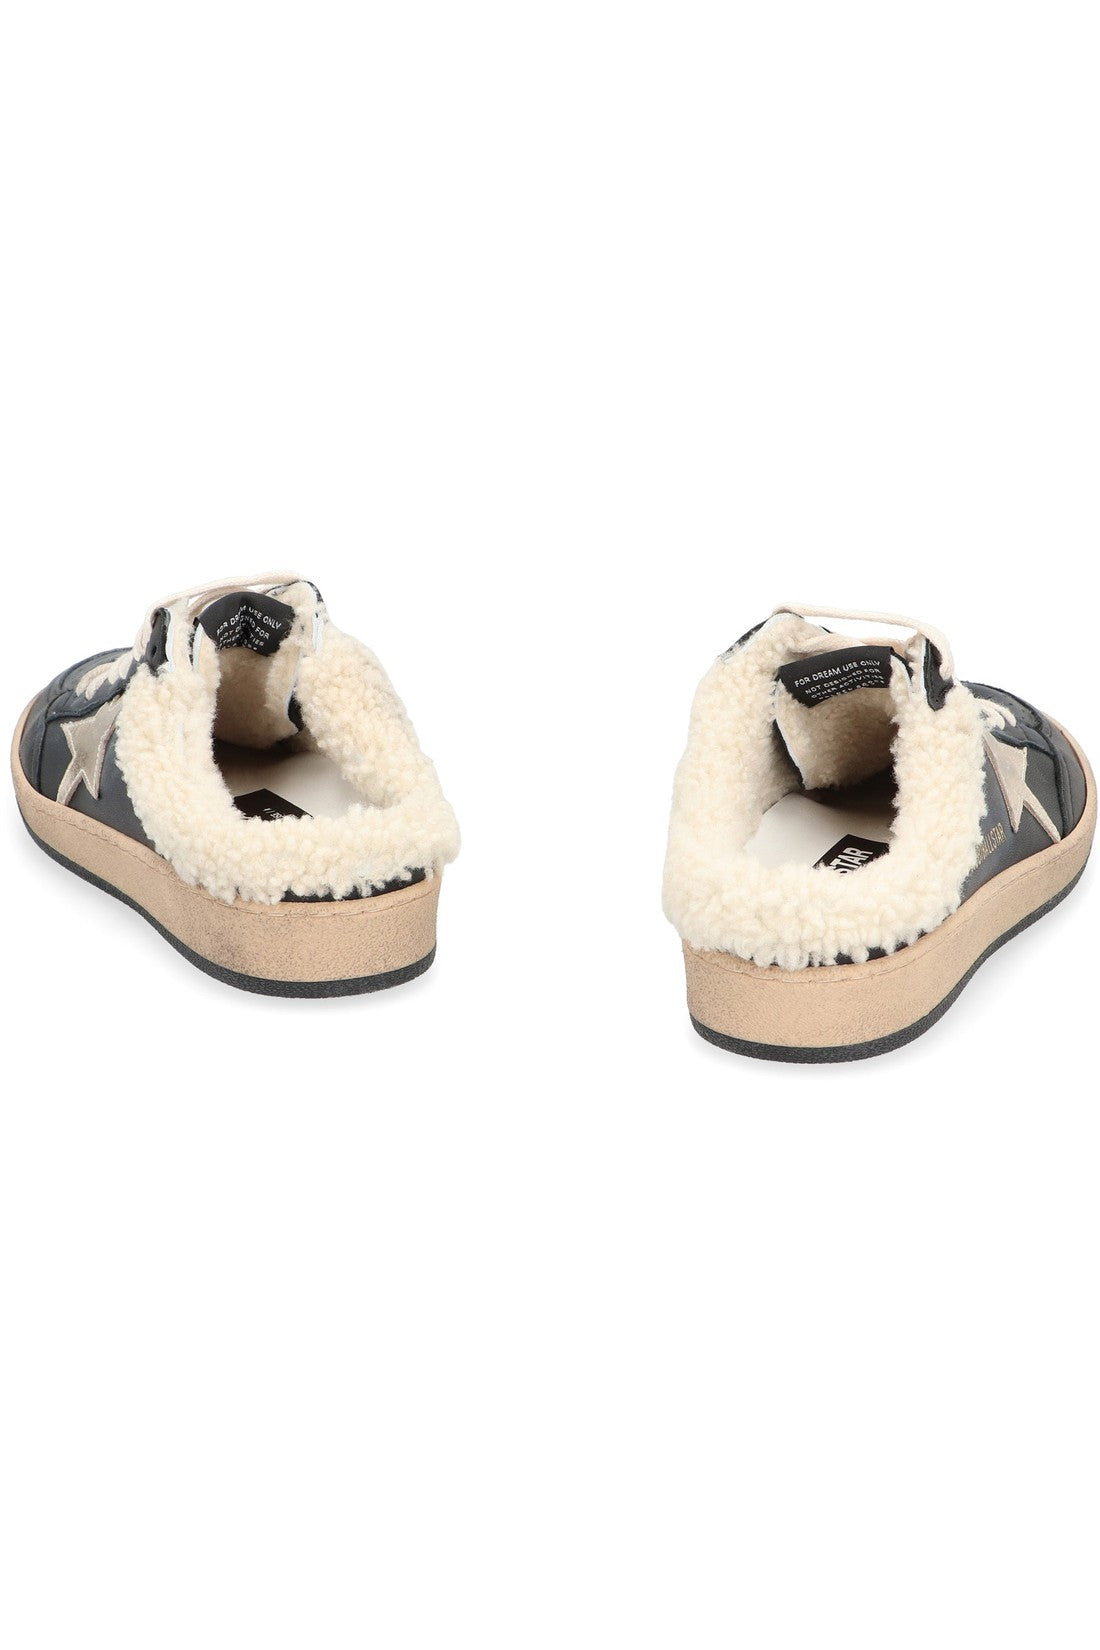 Golden Goose-OUTLET-SALE-Ball Star leather mules-ARCHIVIST